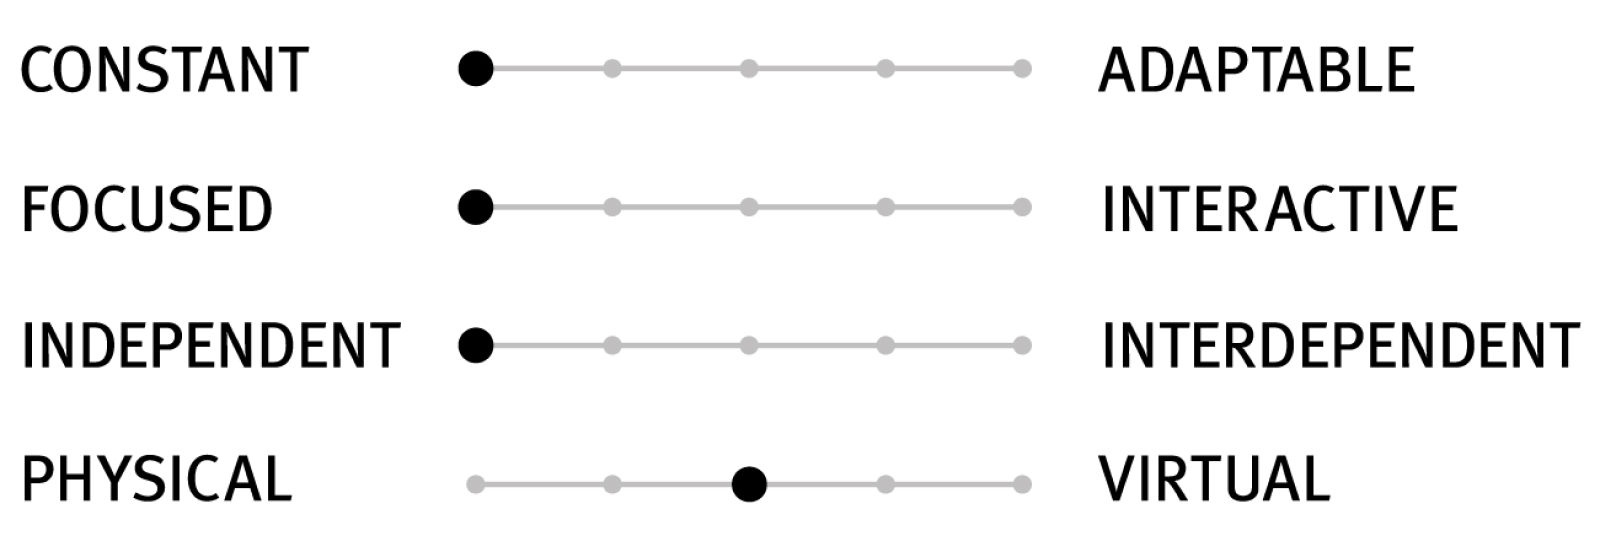 A scale with four sets of sliders that indicate the design characteristics of a setting. These sliders describe the setting as highly constant (not flexible), focused (not interactive), and independent, while balancing physical and virtual needs.